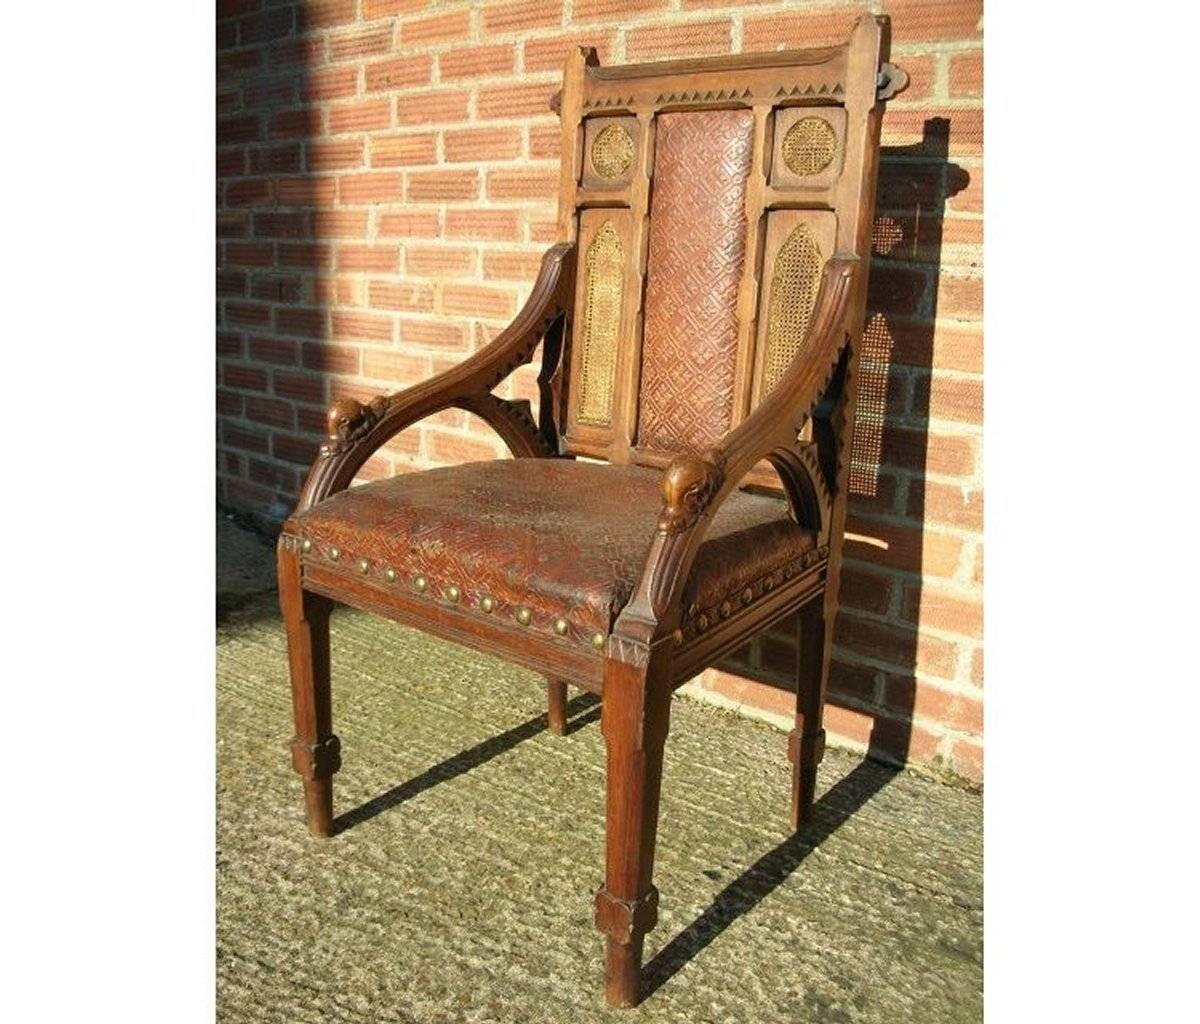 John Pollard Seddon A Rare Gothic Oak Armchair with Carved Dog Heads to the Arms For Sale 13